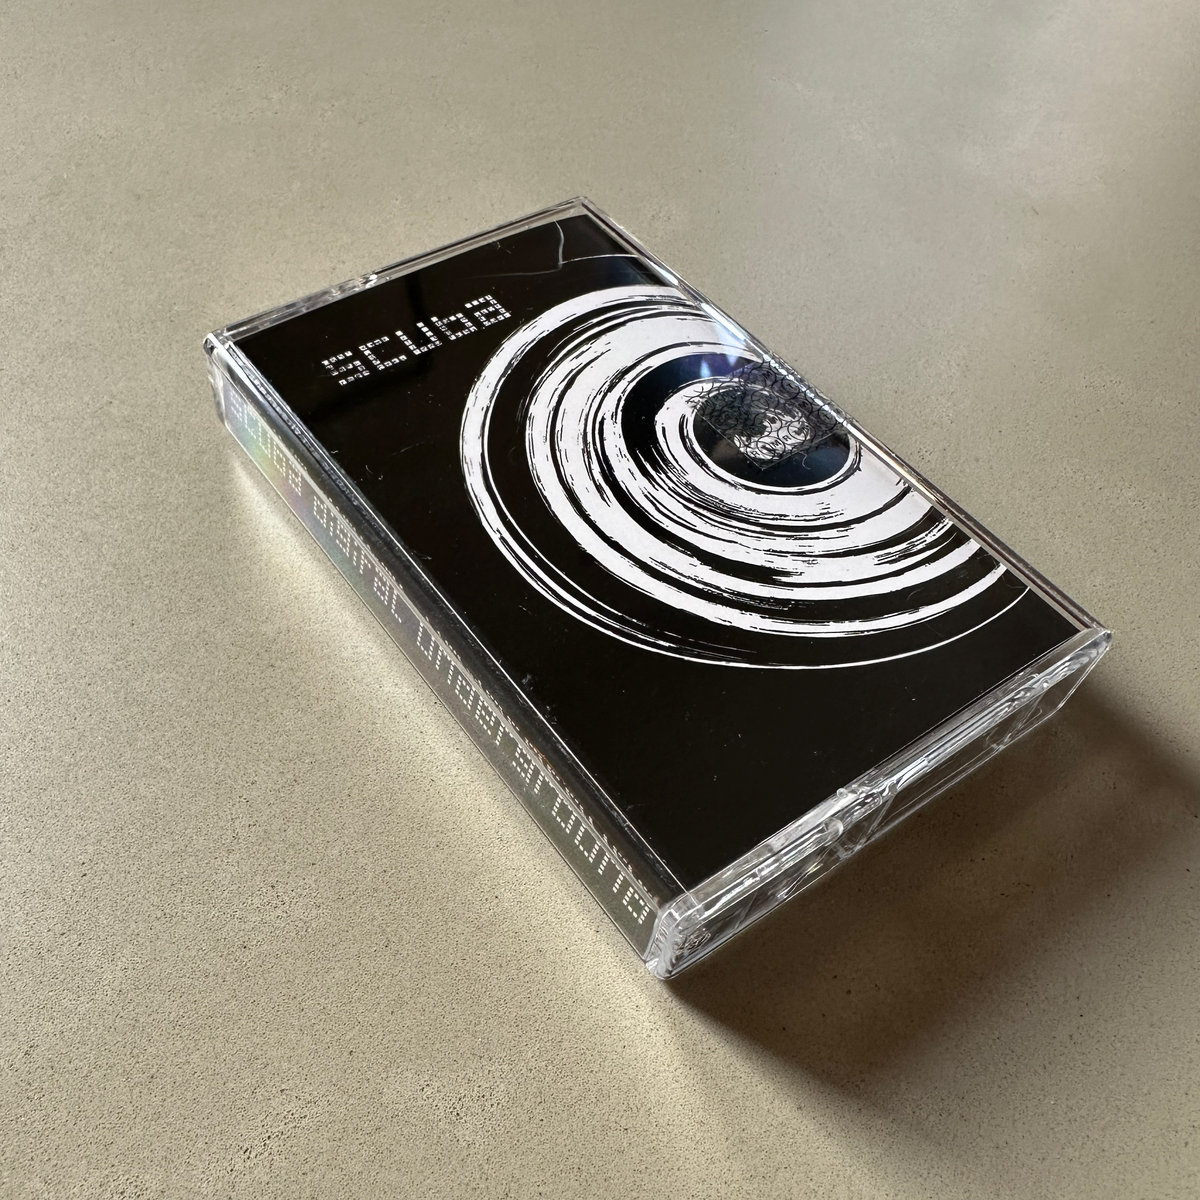 Get the cassette for that cassette player you definitely own. No back stock on either of these, once they're gone that's it scubaofficial.bandcamp.com/album/digital-…